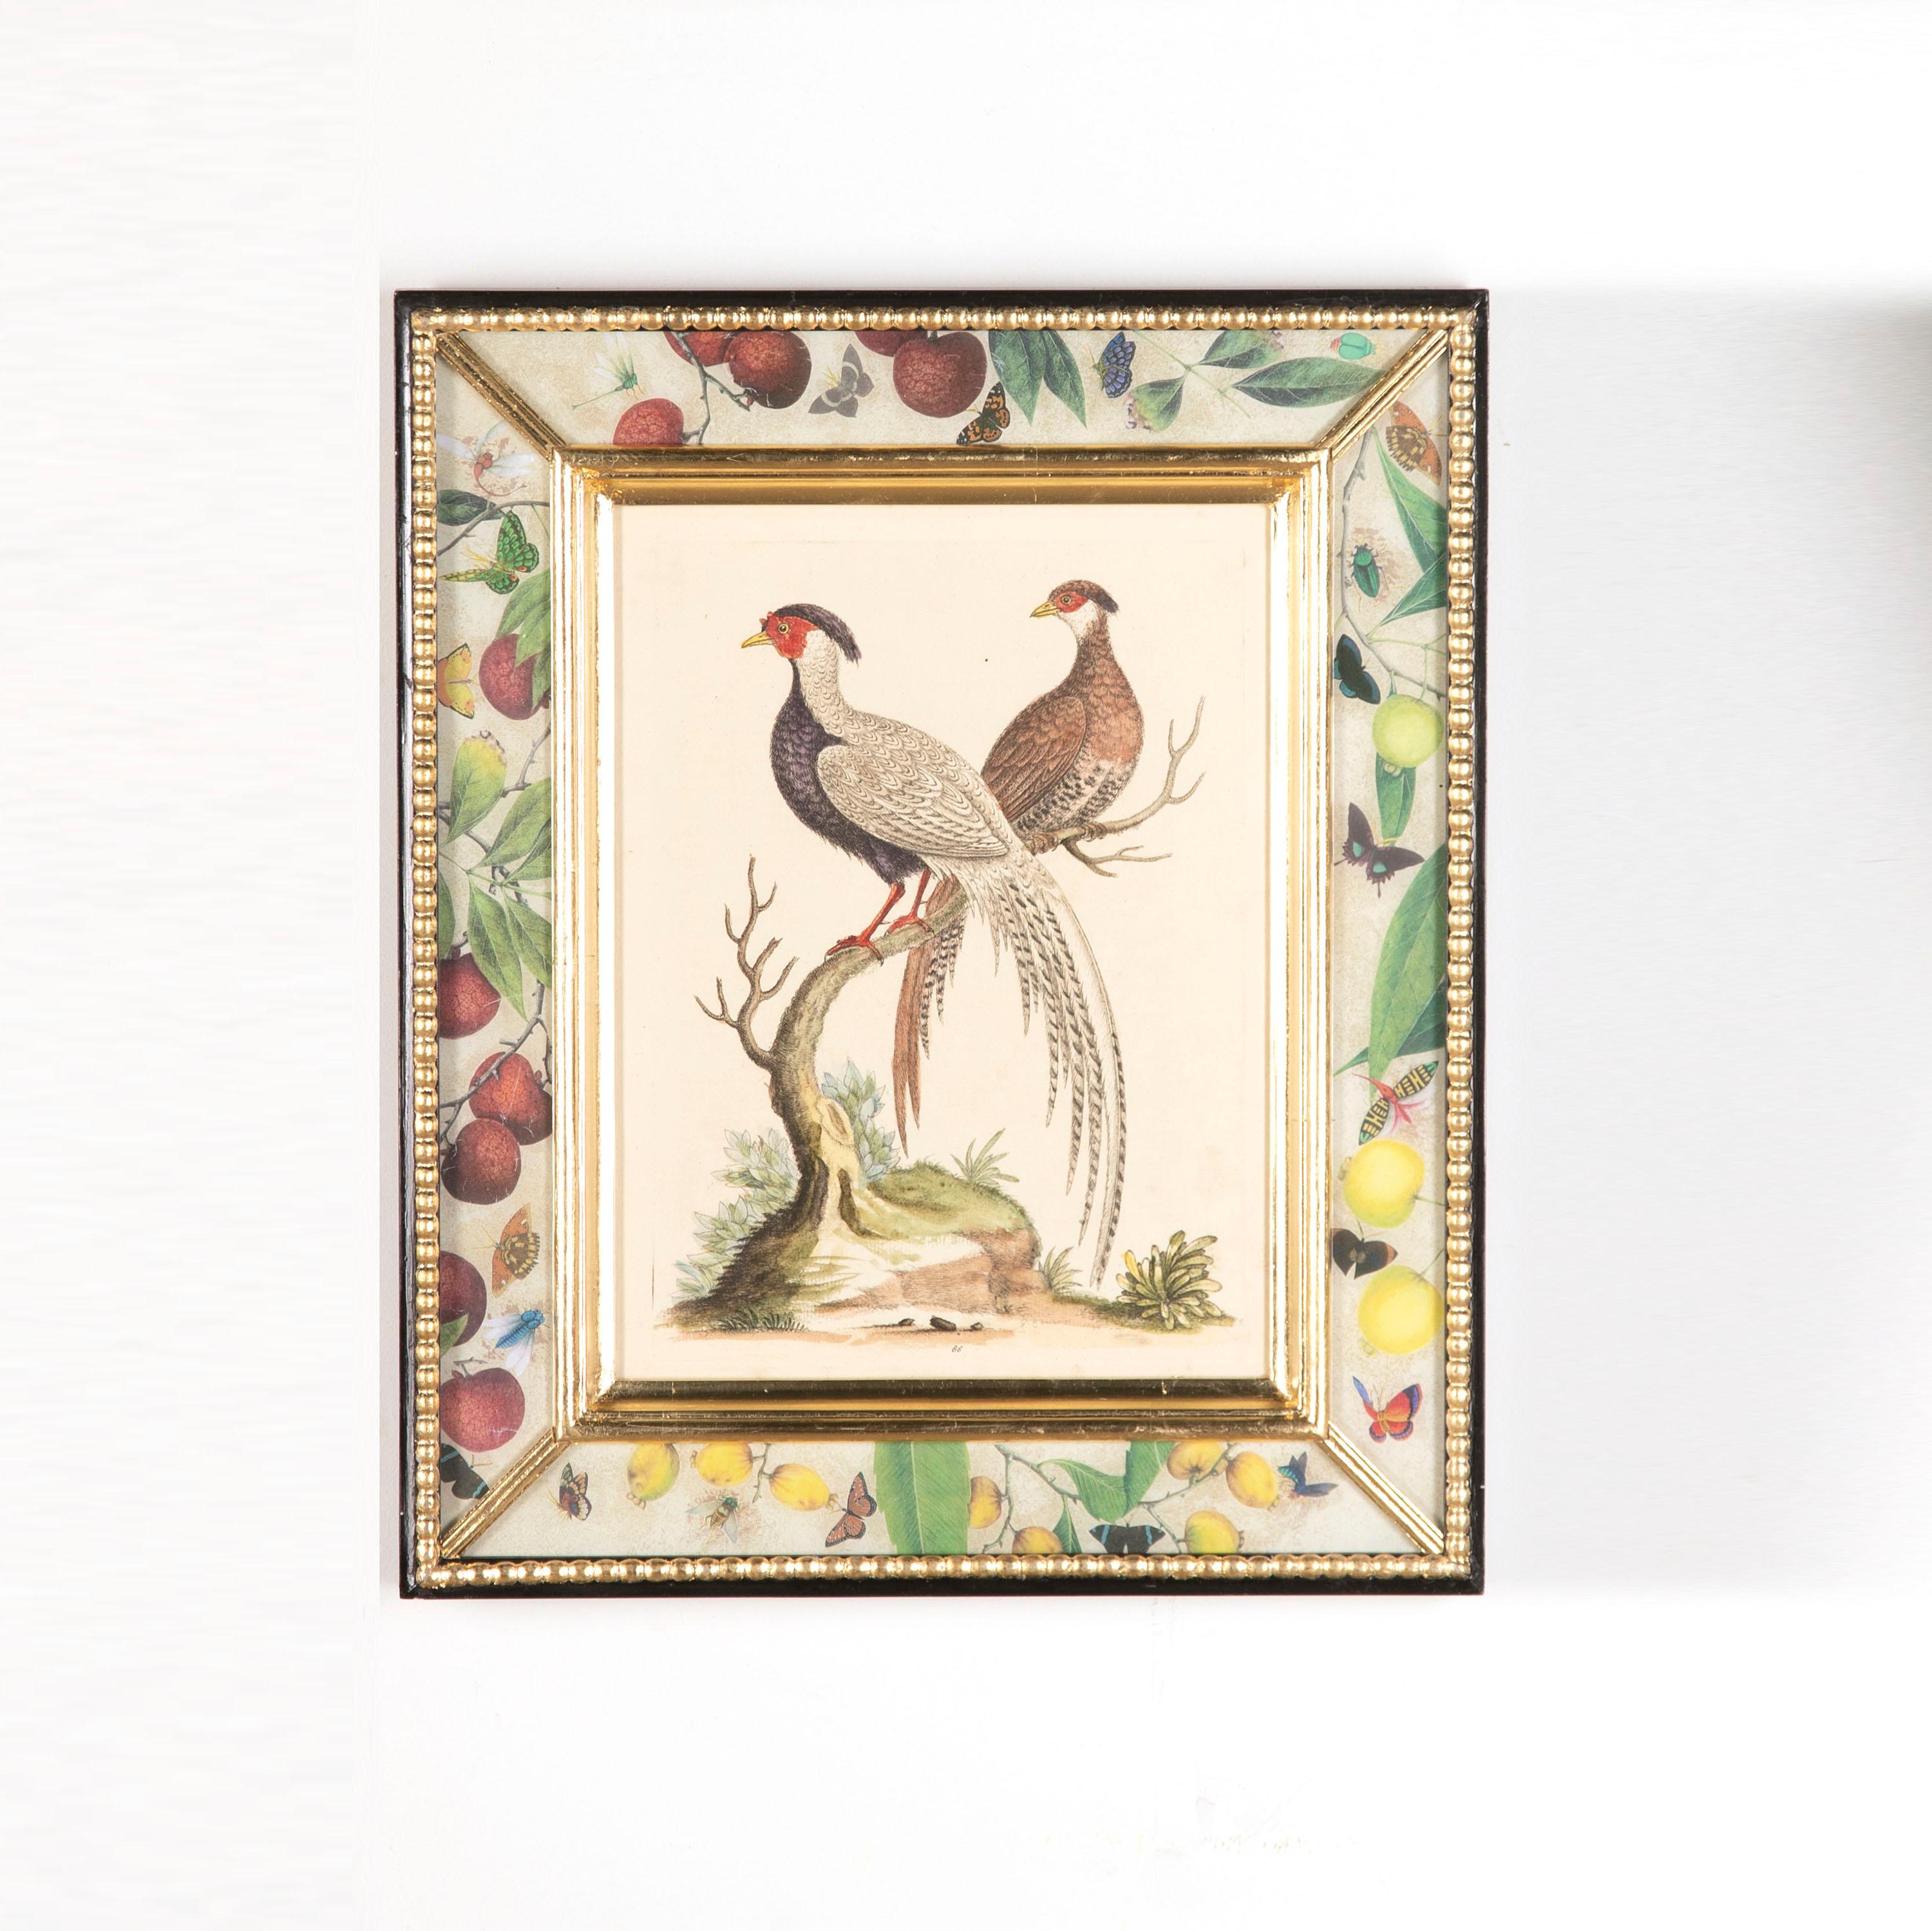 A striking set of twelve mid 18th Century English engravings of birds. 

These charming engravings are hand-coloured and demonstrate extraordinary attention to natural details. 

These engravings come from 